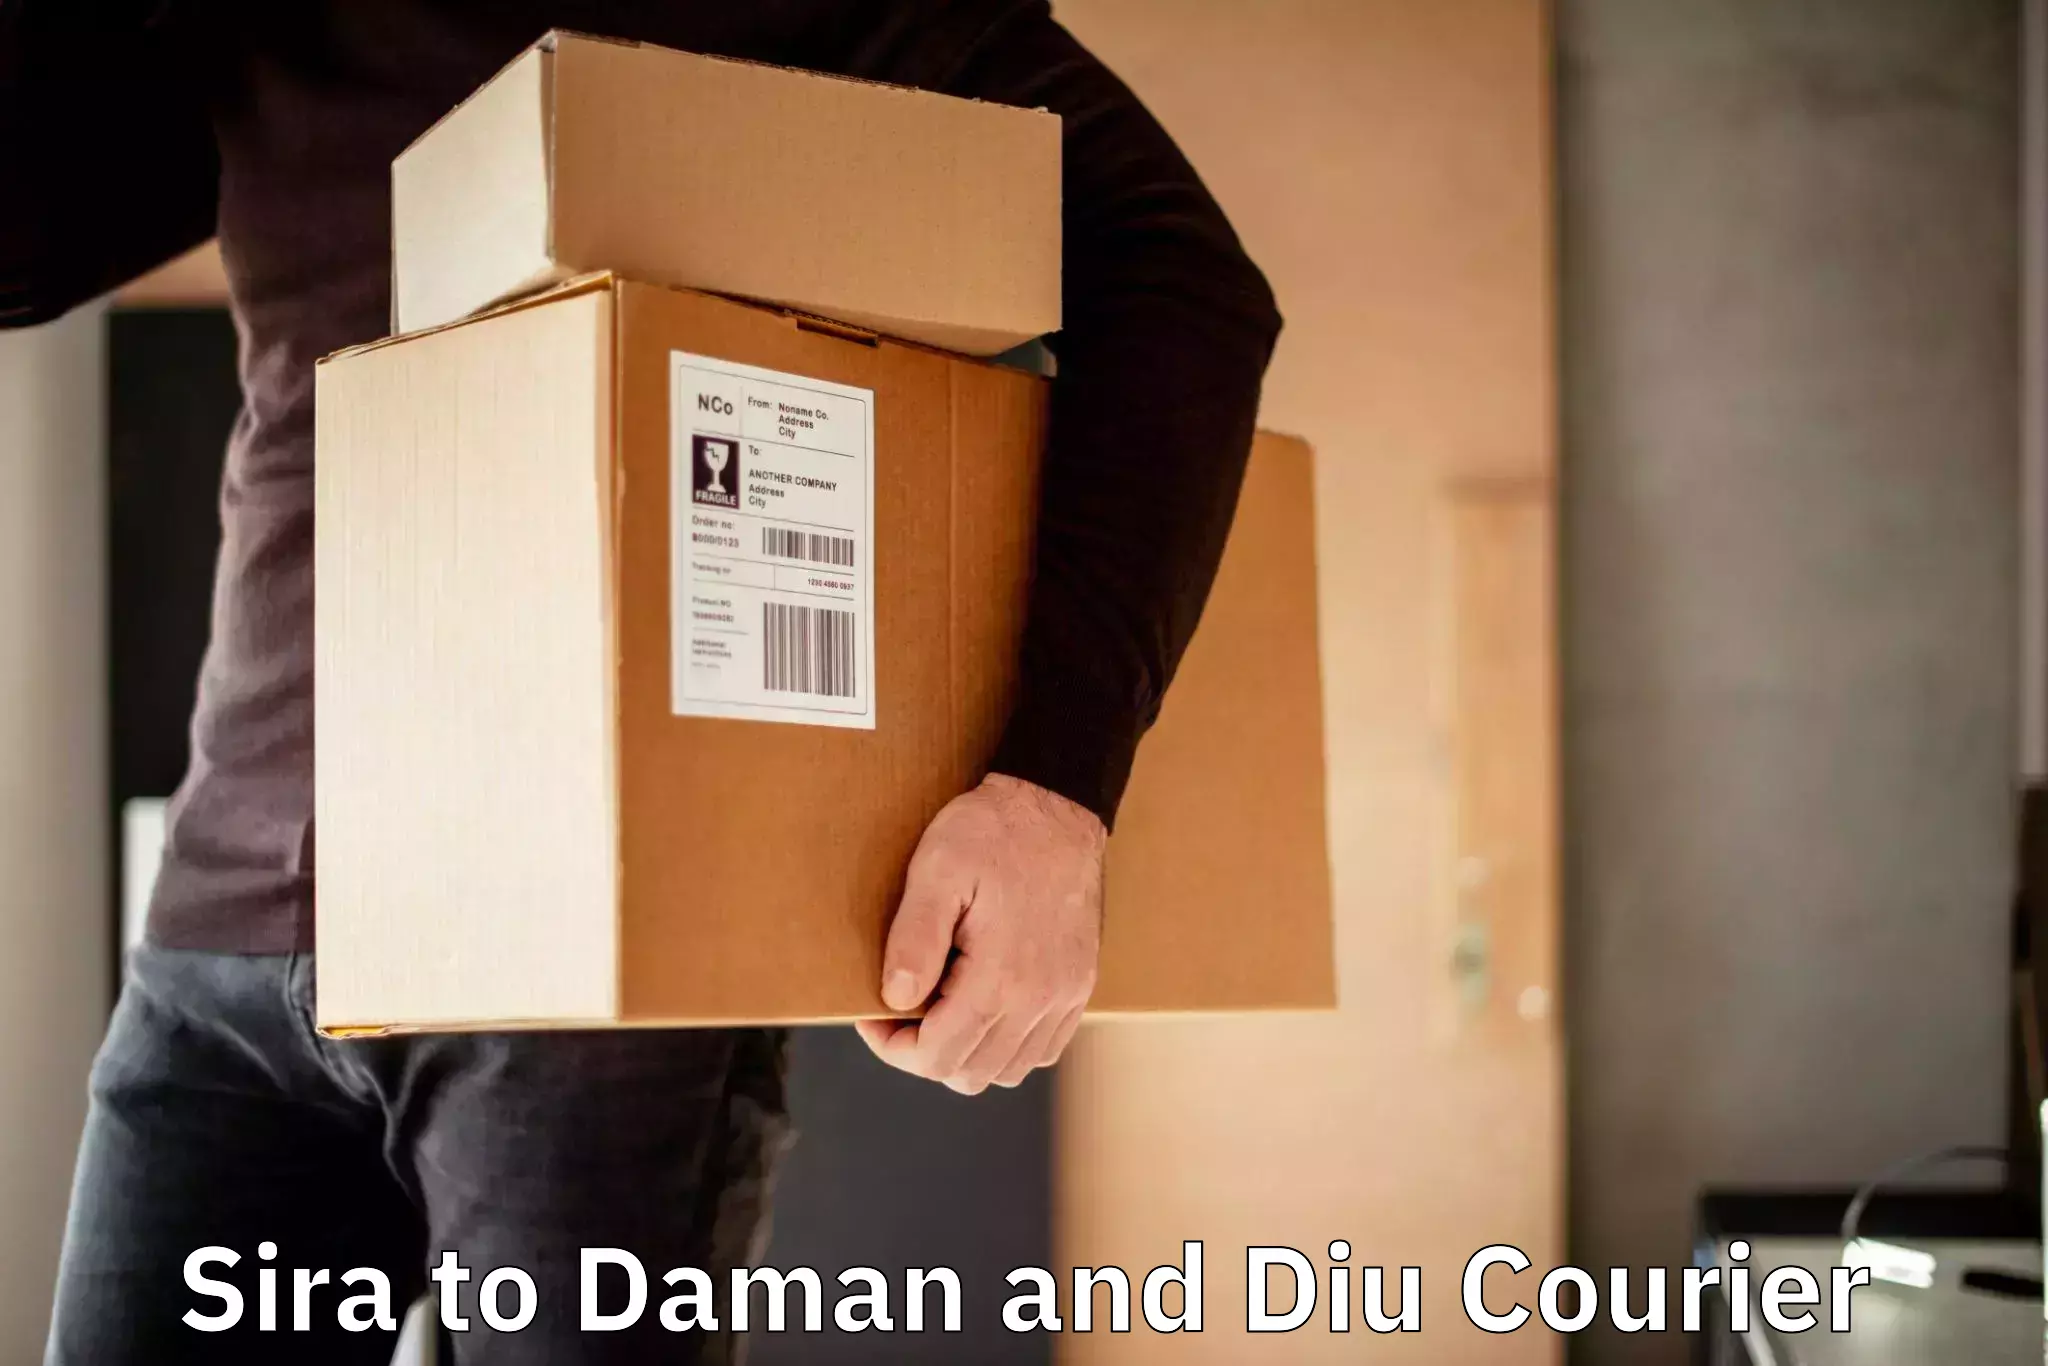 Courier service efficiency Sira to Daman and Diu